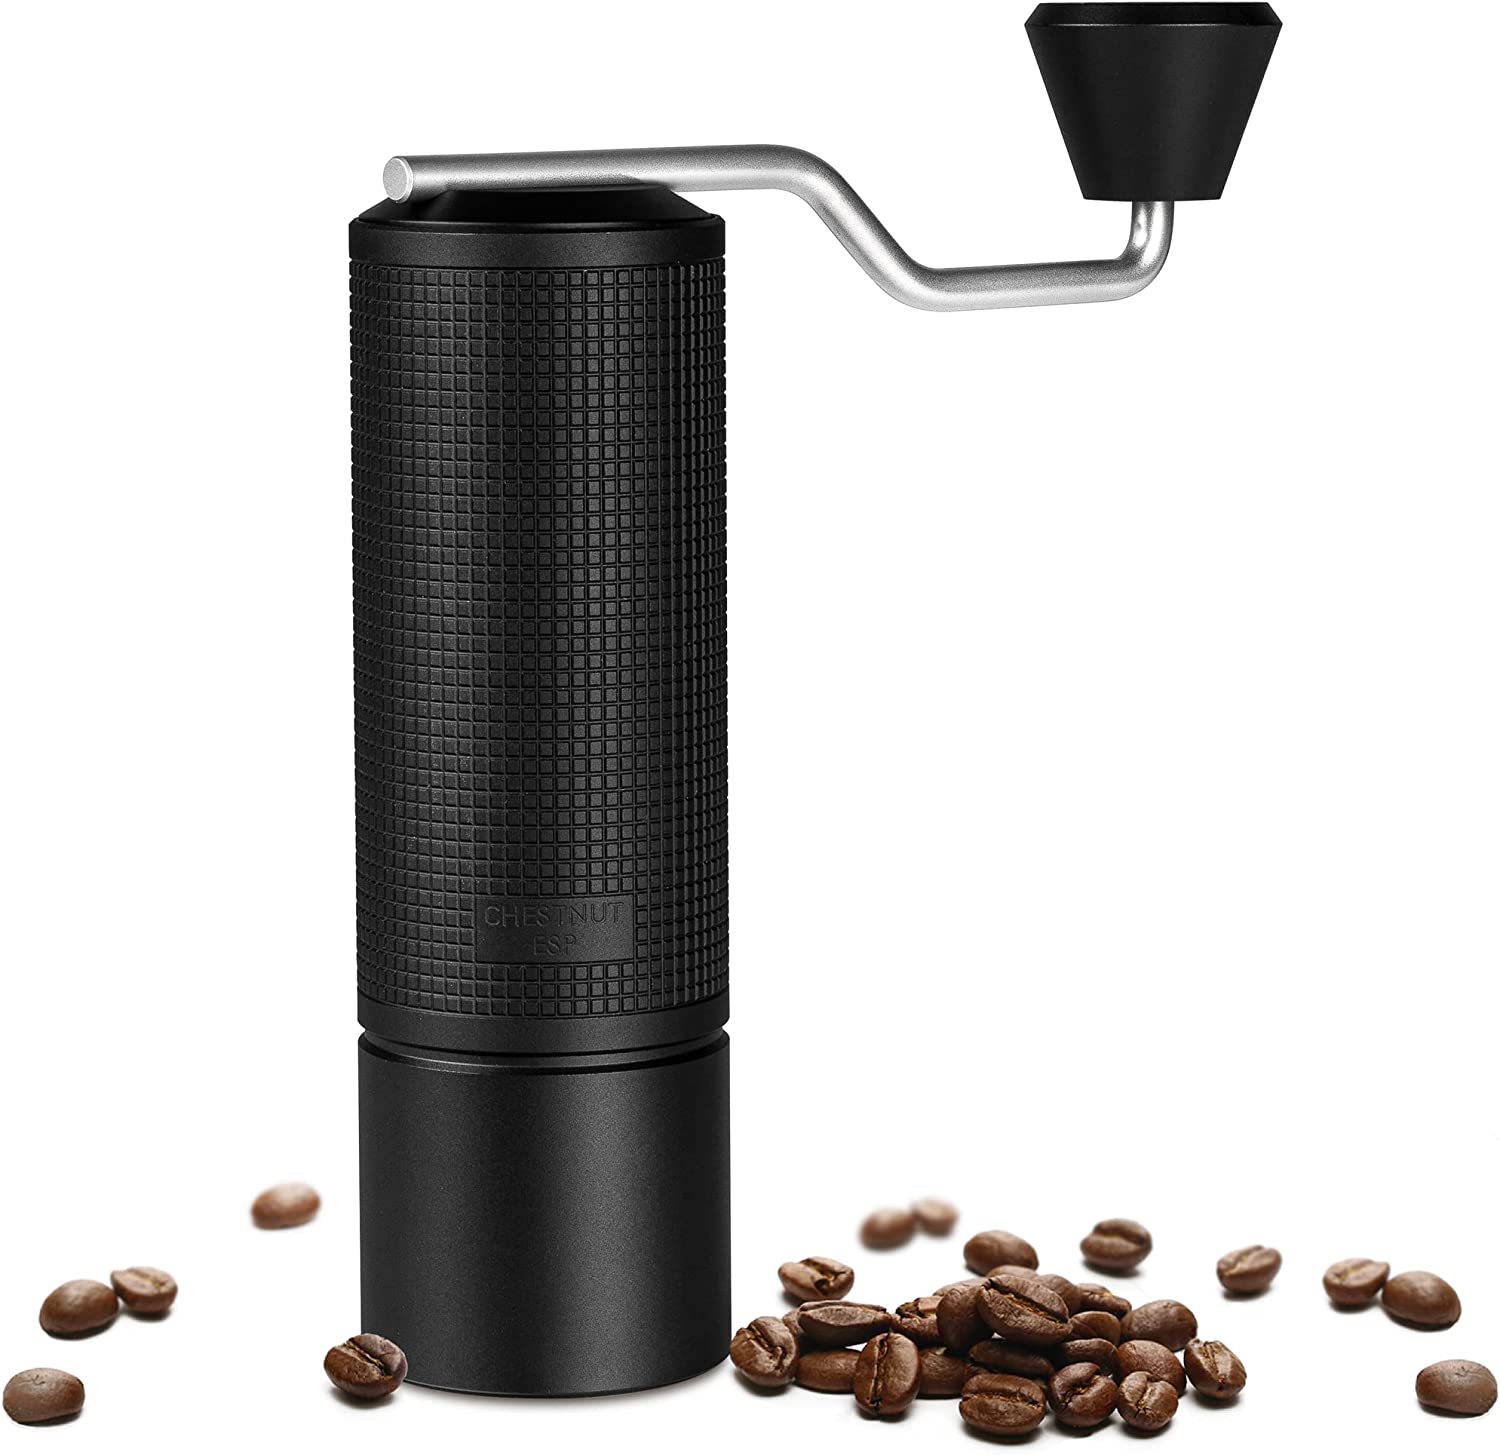 TIMEMORE Chestnut ESP Manual Coffee Grinder with Patented Tapered Burr Stainless Steel - Precise Adjustable Setting, Hand Coffee Grinder for Espresso Moka French Press Pour Over - Black